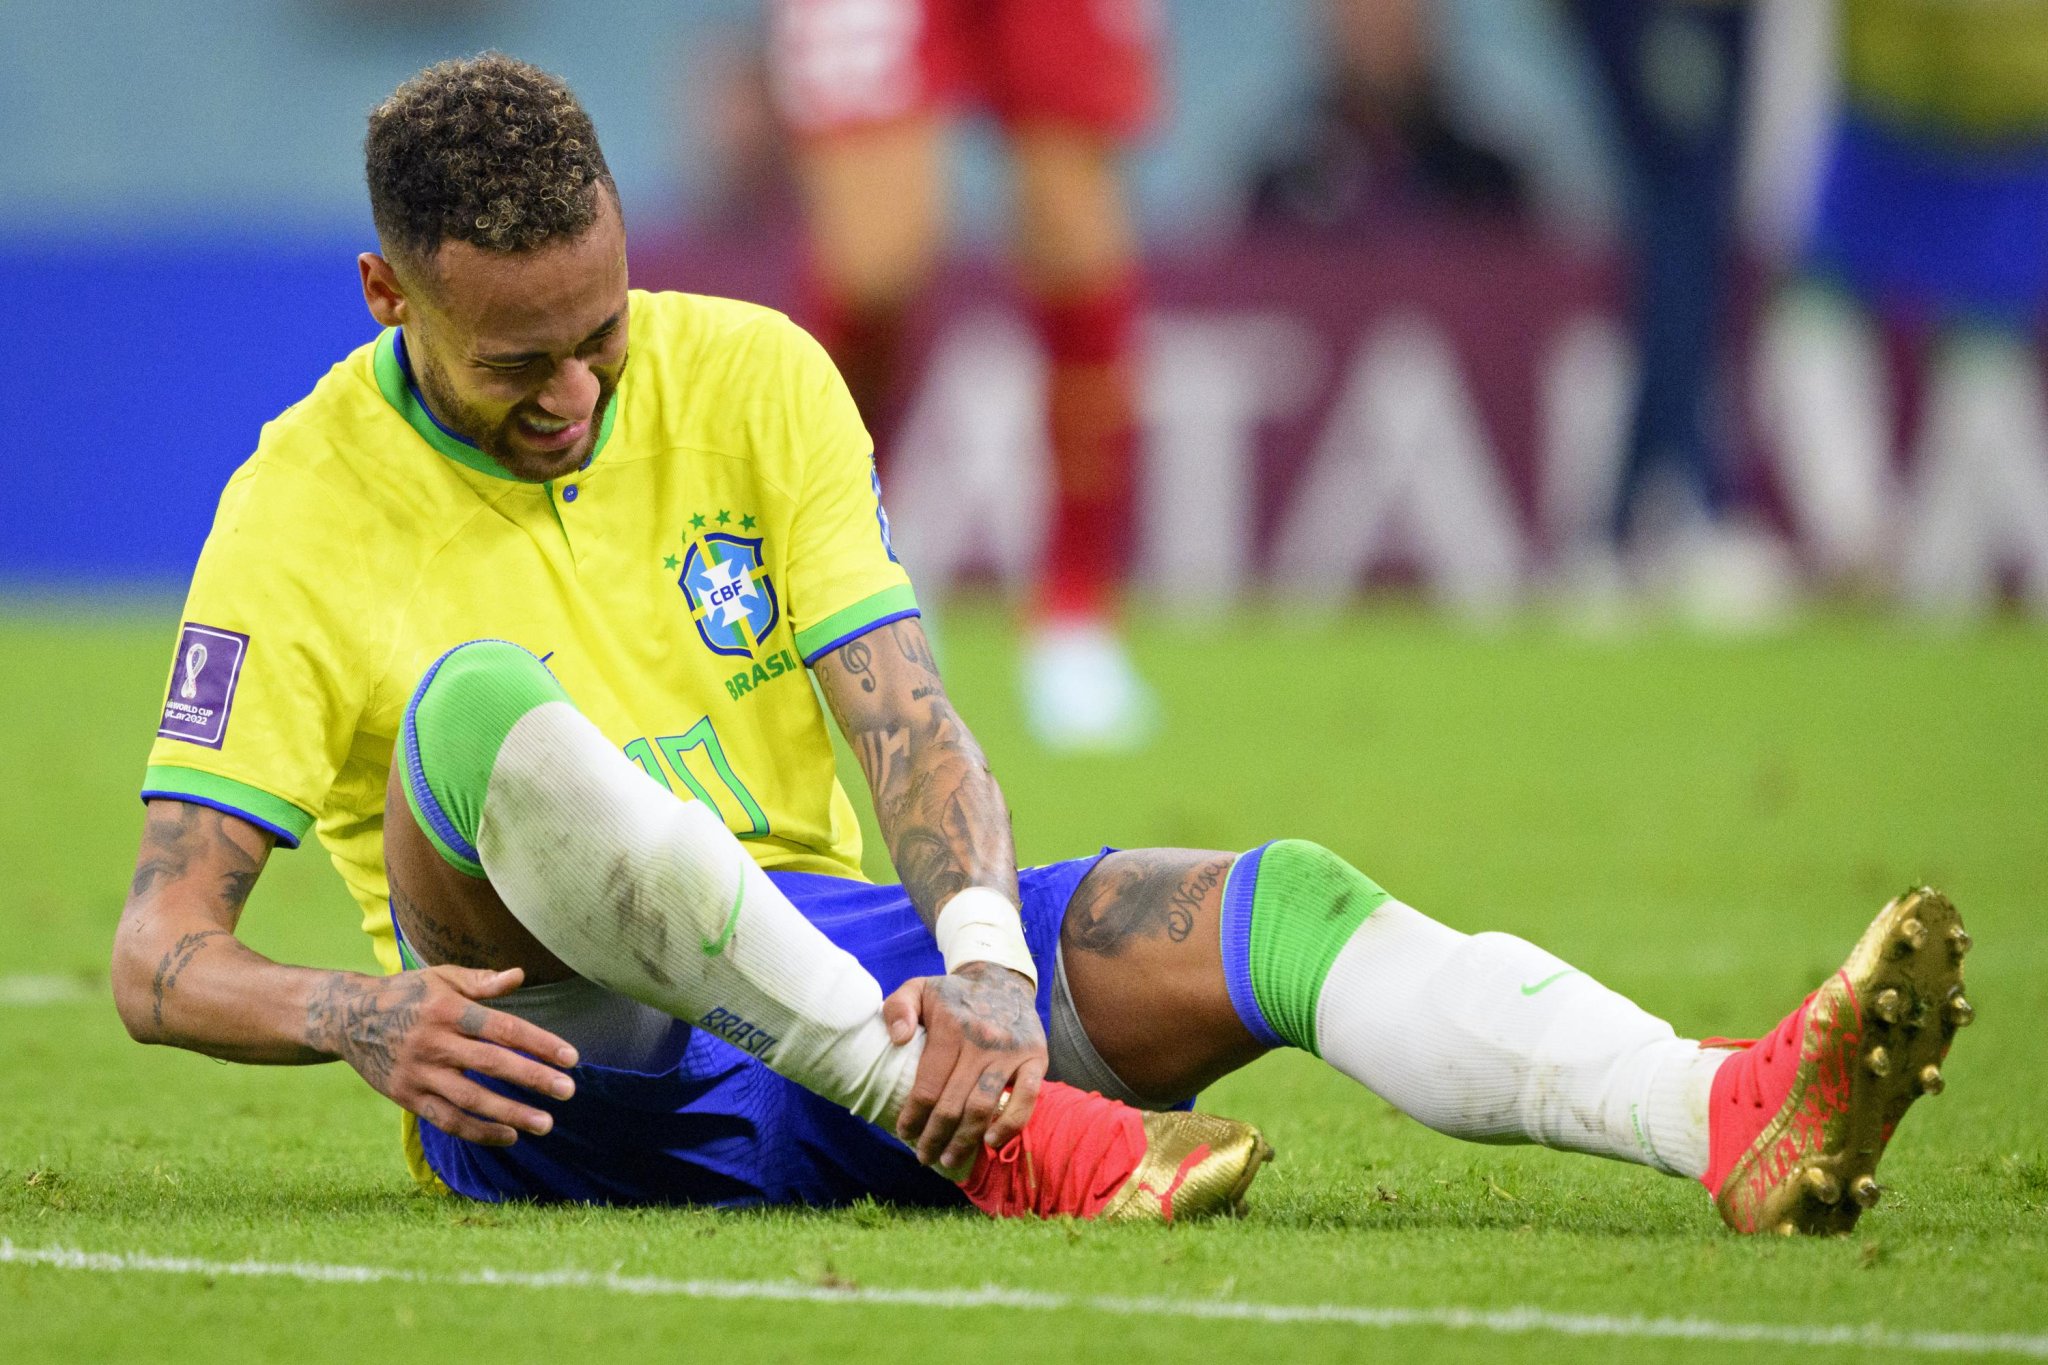 Brazil to decide on Neymar after Cameroon game at World Cup